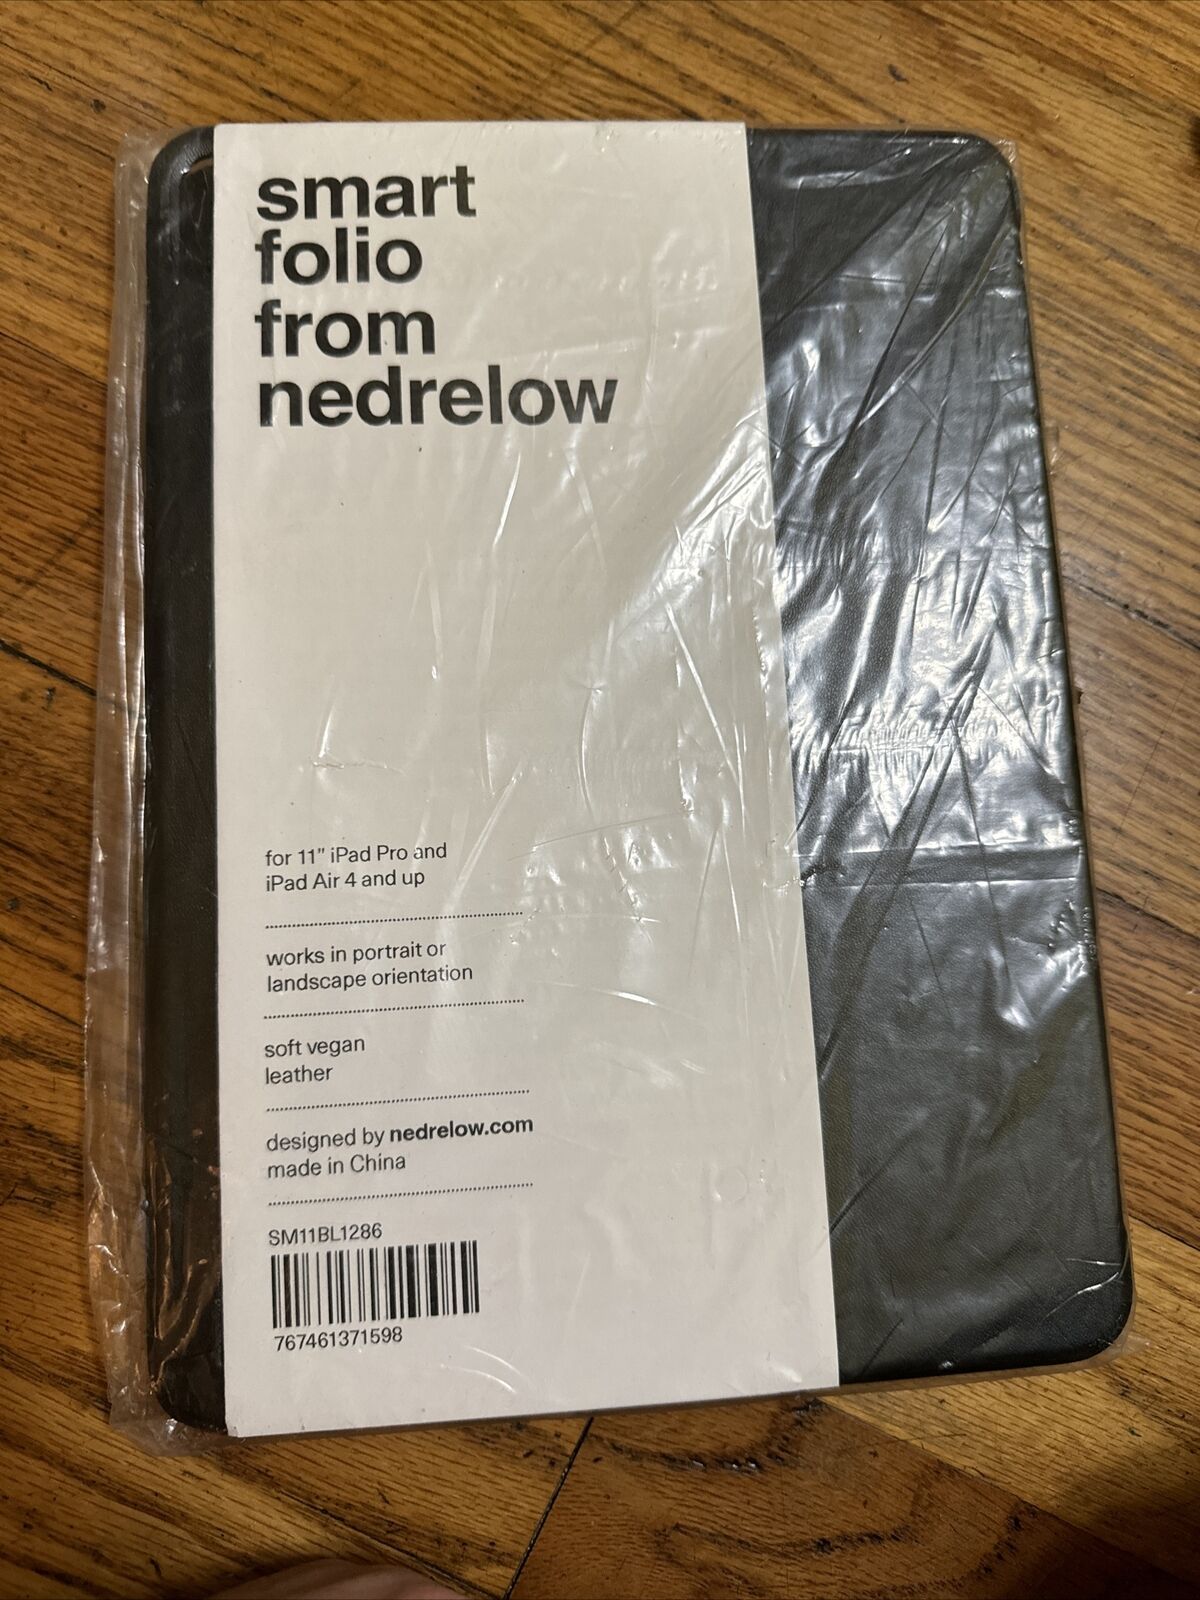 Smart Folio From Nedrelow For 11 in Ipad Pro And iPad Air 4 And Up